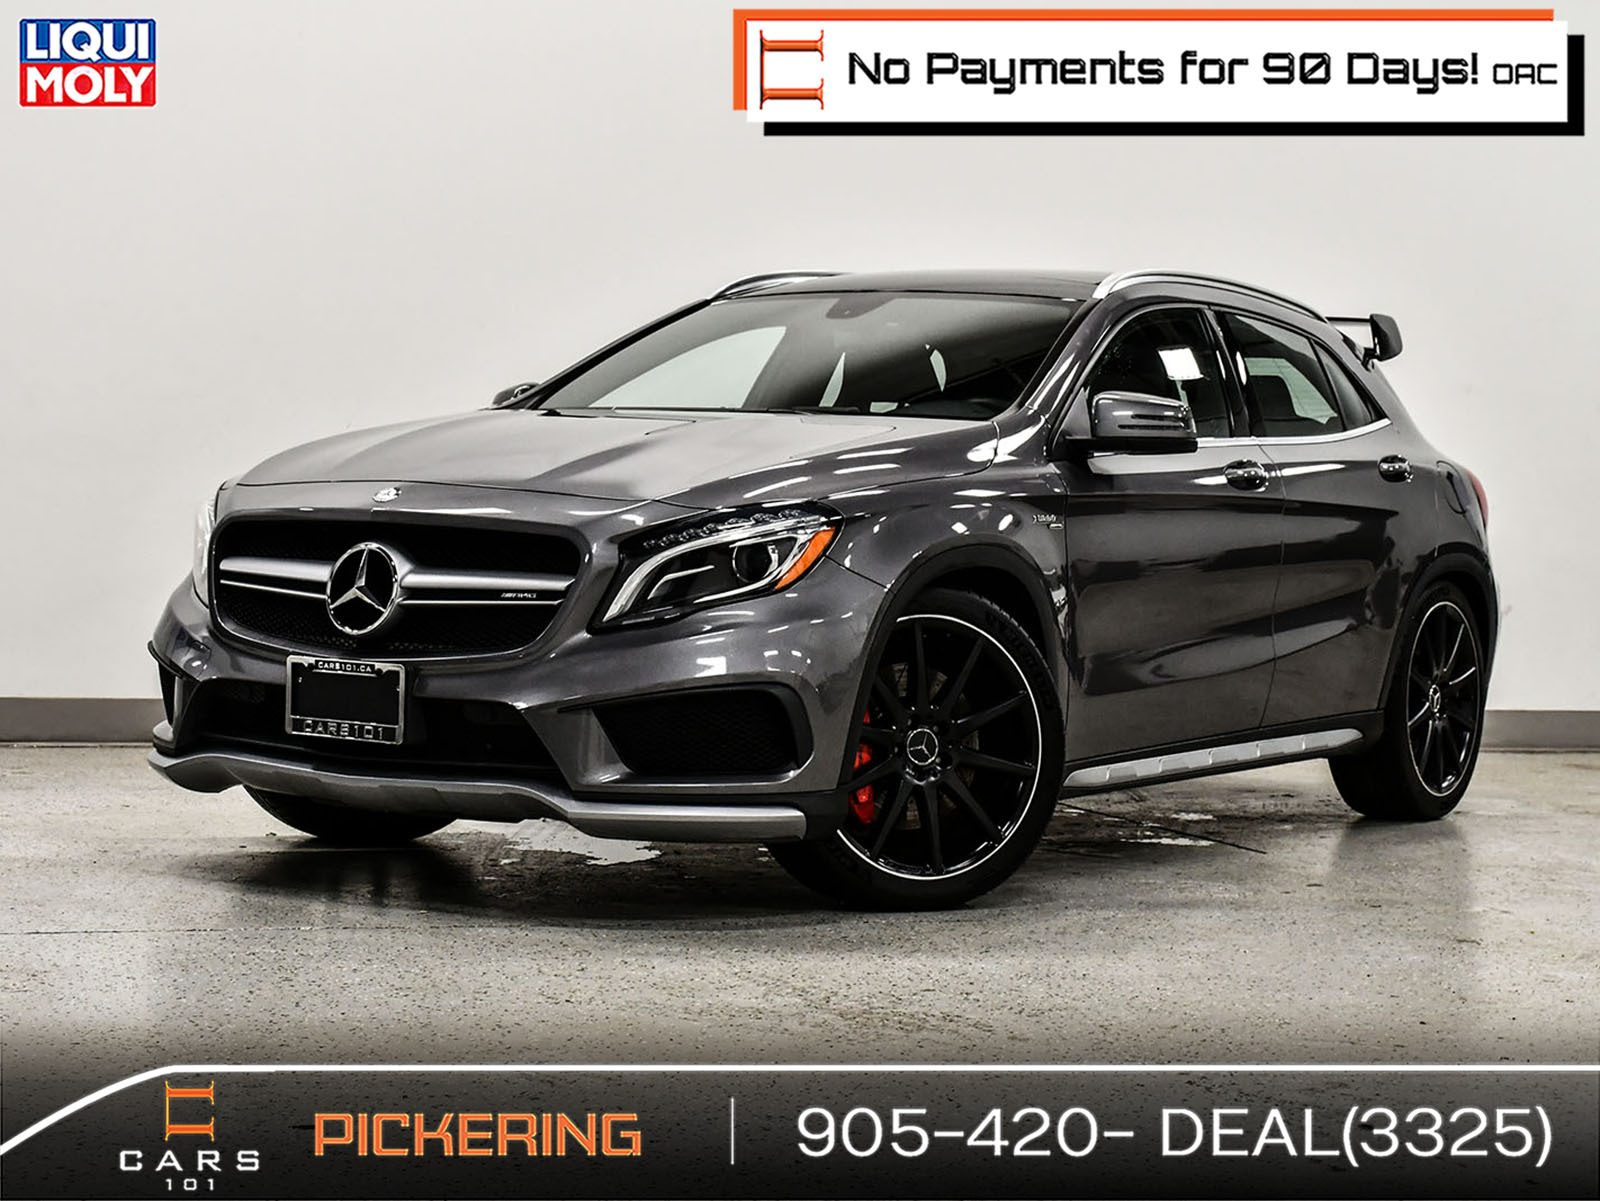 2015 Mercedes-Benz GLA-Class AMG+|COLLISION WARNING|SPOILER|CLEAN|LOW KM'S|